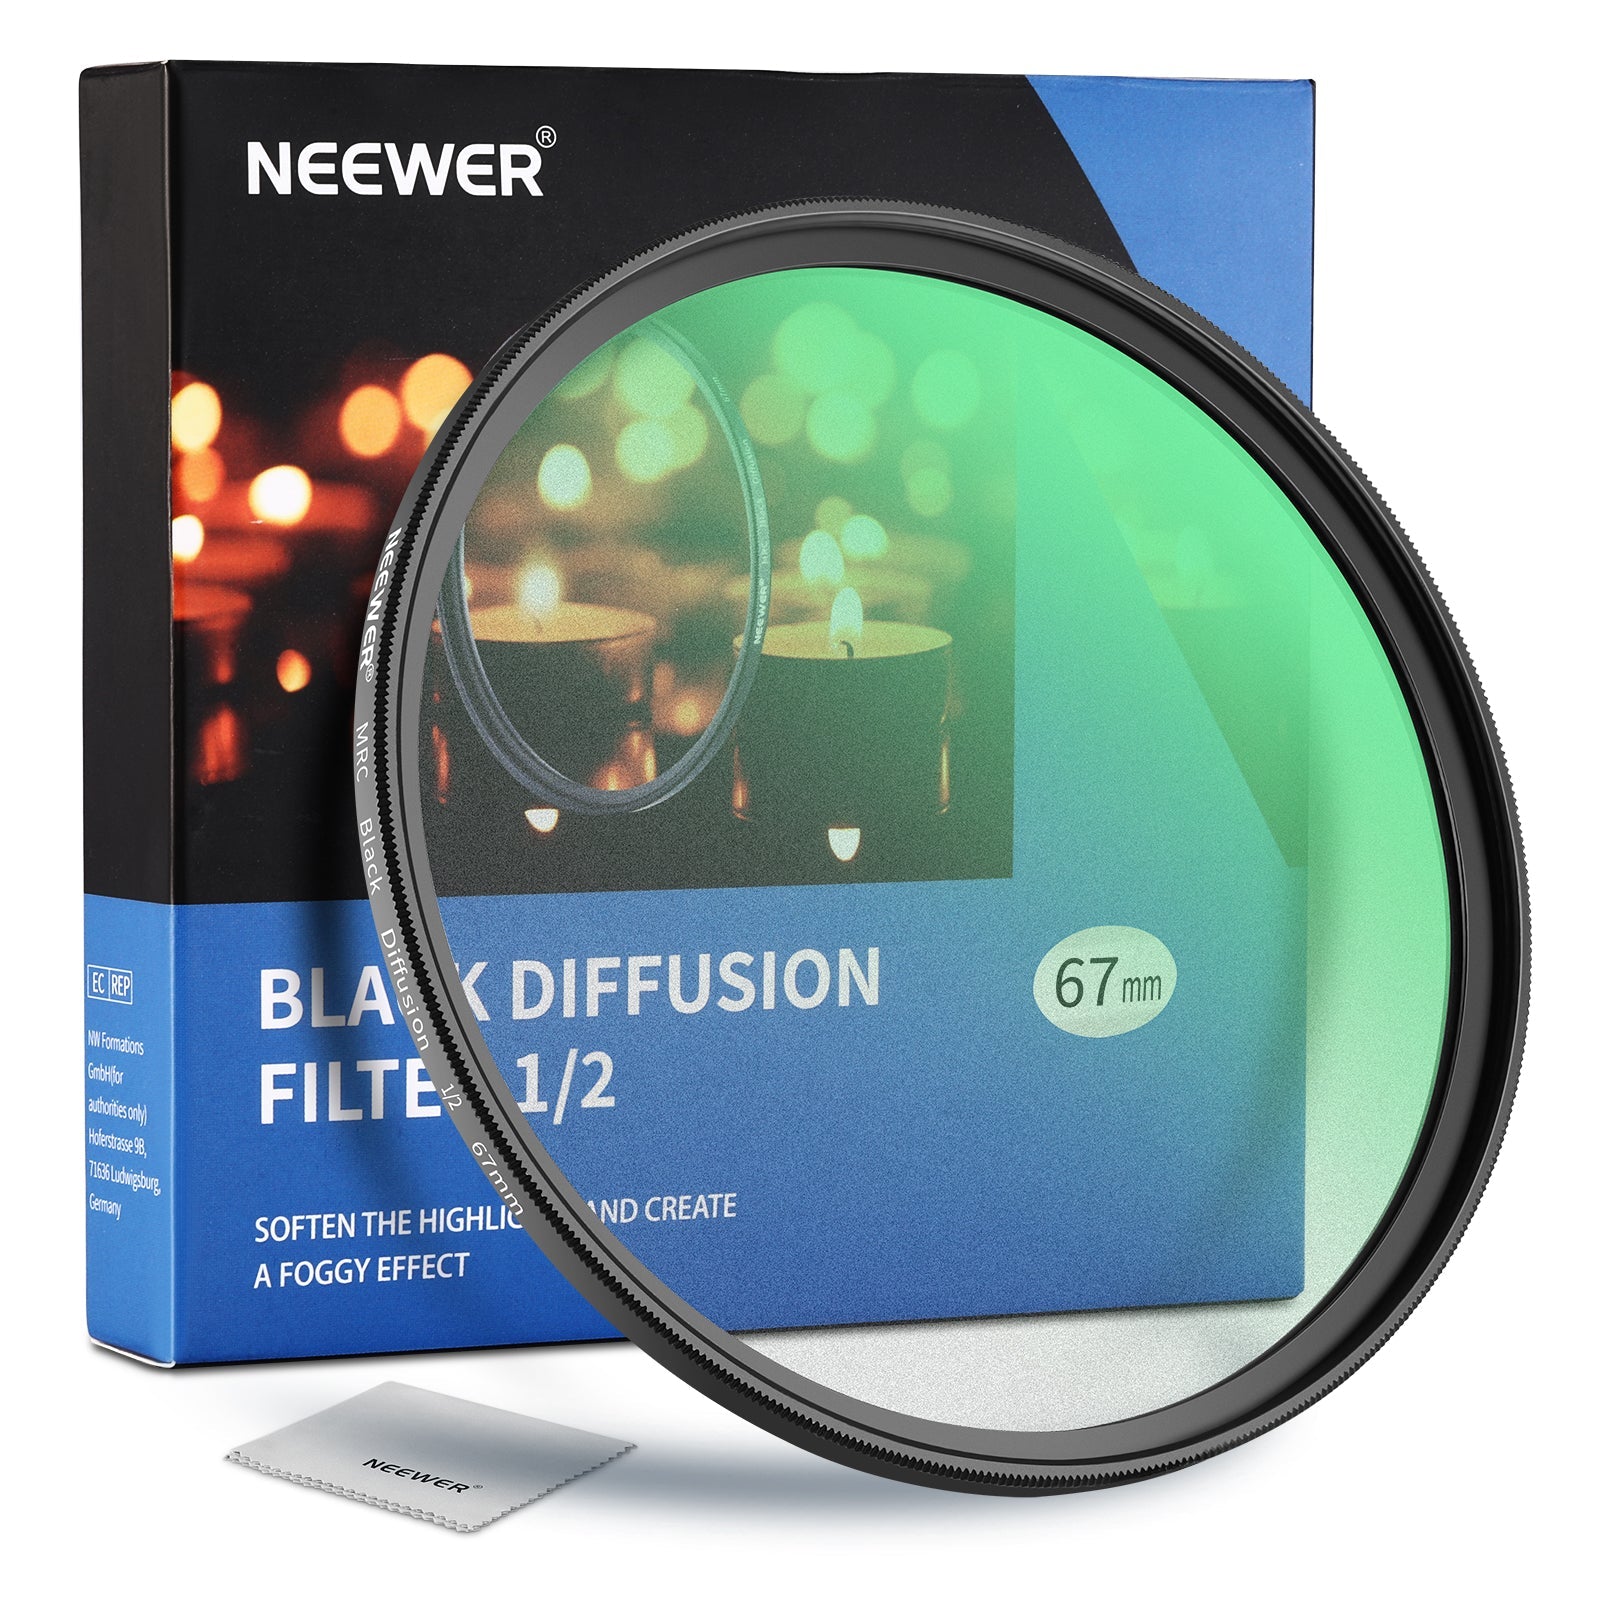 NEEWER Black Diffusion 1/2 Filter Dreamy Cinematic Effect Camera Ultra Slim Filter